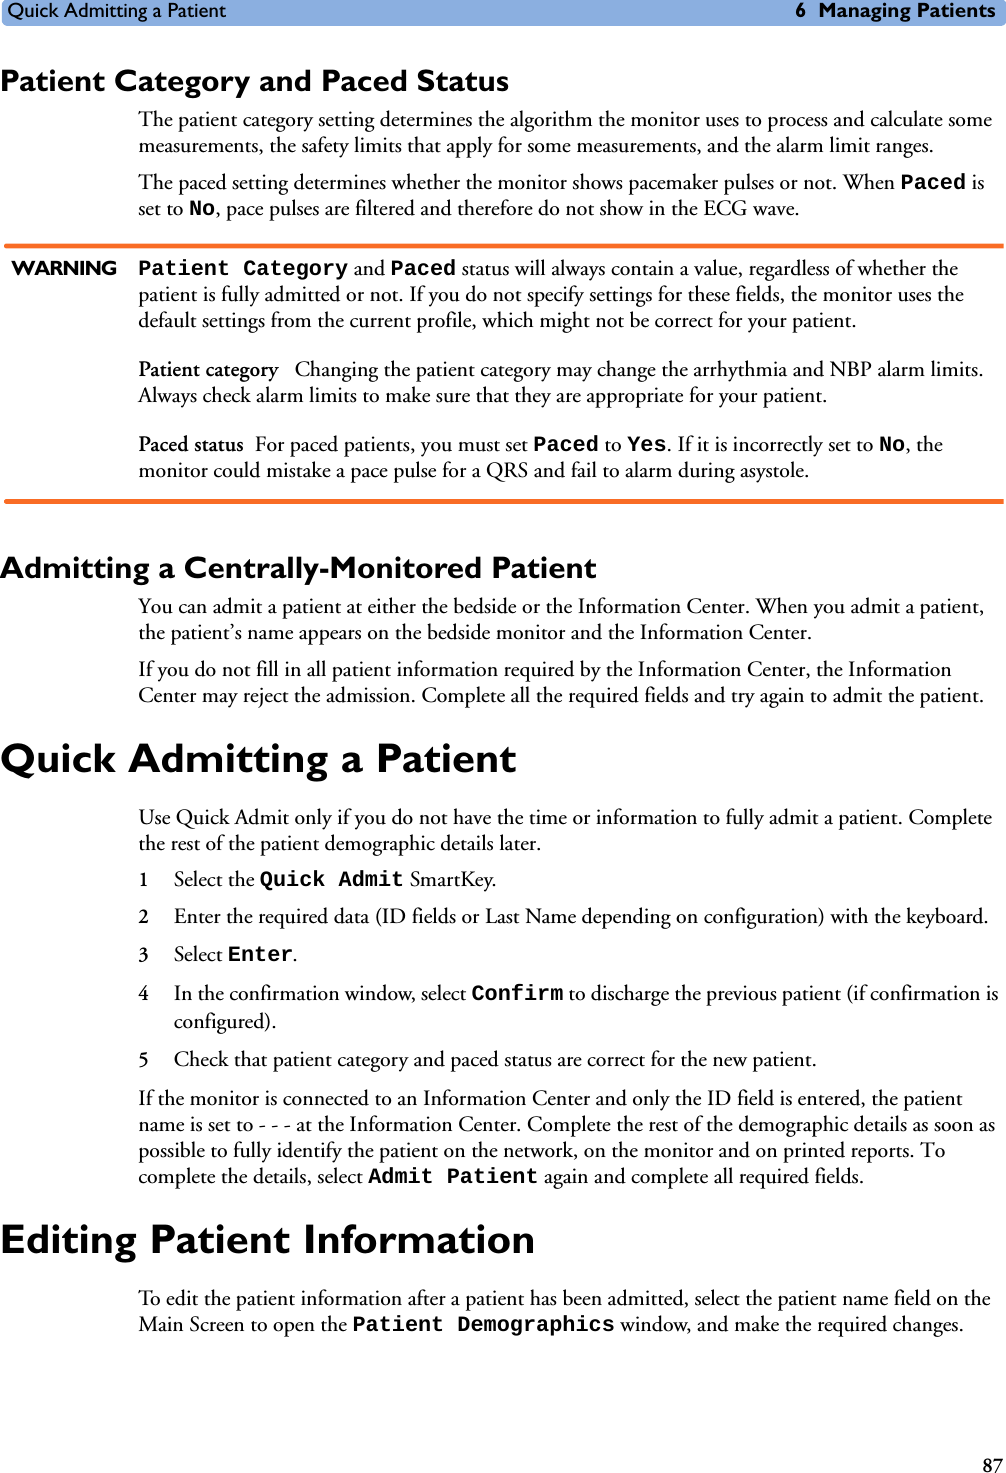 Quick Admitting a Patient 6 Managing Patients87Patient Category and Paced StatusThe patient category setting determines the algorithm the monitor uses to process and calculate some measurements, the safety limits that apply for some measurements, and the alarm limit ranges.The paced setting determines whether the monitor shows pacemaker pulses or not. When Paced is set to No, pace pulses are filtered and therefore do not show in the ECG wave.WARNING Patient Category and Paced status will always contain a value, regardless of whether the patient is fully admitted or not. If you do not specify settings for these fields, the monitor uses the default settings from the current profile, which might not be correct for your patient.Patient category  Changing the patient category may change the arrhythmia and NBP alarm limits. Always check alarm limits to make sure that they are appropriate for your patient.Paced status For paced patients, you must set Paced to Yes. If it is incorrectly set to No, the monitor could mistake a pace pulse for a QRS and fail to alarm during asystole.Admitting a Centrally-Monitored PatientYou can admit a patient at either the bedside or the Information Center. When you admit a patient, the patient’s name appears on the bedside monitor and the Information Center.If you do not fill in all patient information required by the Information Center, the Information Center may reject the admission. Complete all the required fields and try again to admit the patient.Quick Admitting a PatientUse Quick Admit only if you do not have the time or information to fully admit a patient. Complete the rest of the patient demographic details later.1Select the Quick Admit SmartKey.2Enter the required data (ID fields or Last Name depending on configuration) with the keyboard.3Select Enter.4In the confirmation window, select Confirm to discharge the previous patient (if confirmation is configured). 5Check that patient category and paced status are correct for the new patient.If the monitor is connected to an Information Center and only the ID field is entered, the patient name is set to - - - at the Information Center. Complete the rest of the demographic details as soon as possible to fully identify the patient on the network, on the monitor and on printed reports. To complete the details, select Admit Patient again and complete all required fields. Editing Patient InformationTo edit the patient information after a patient has been admitted, select the patient name field on the Main Screen to open the Patient Demographics window, and make the required changes.